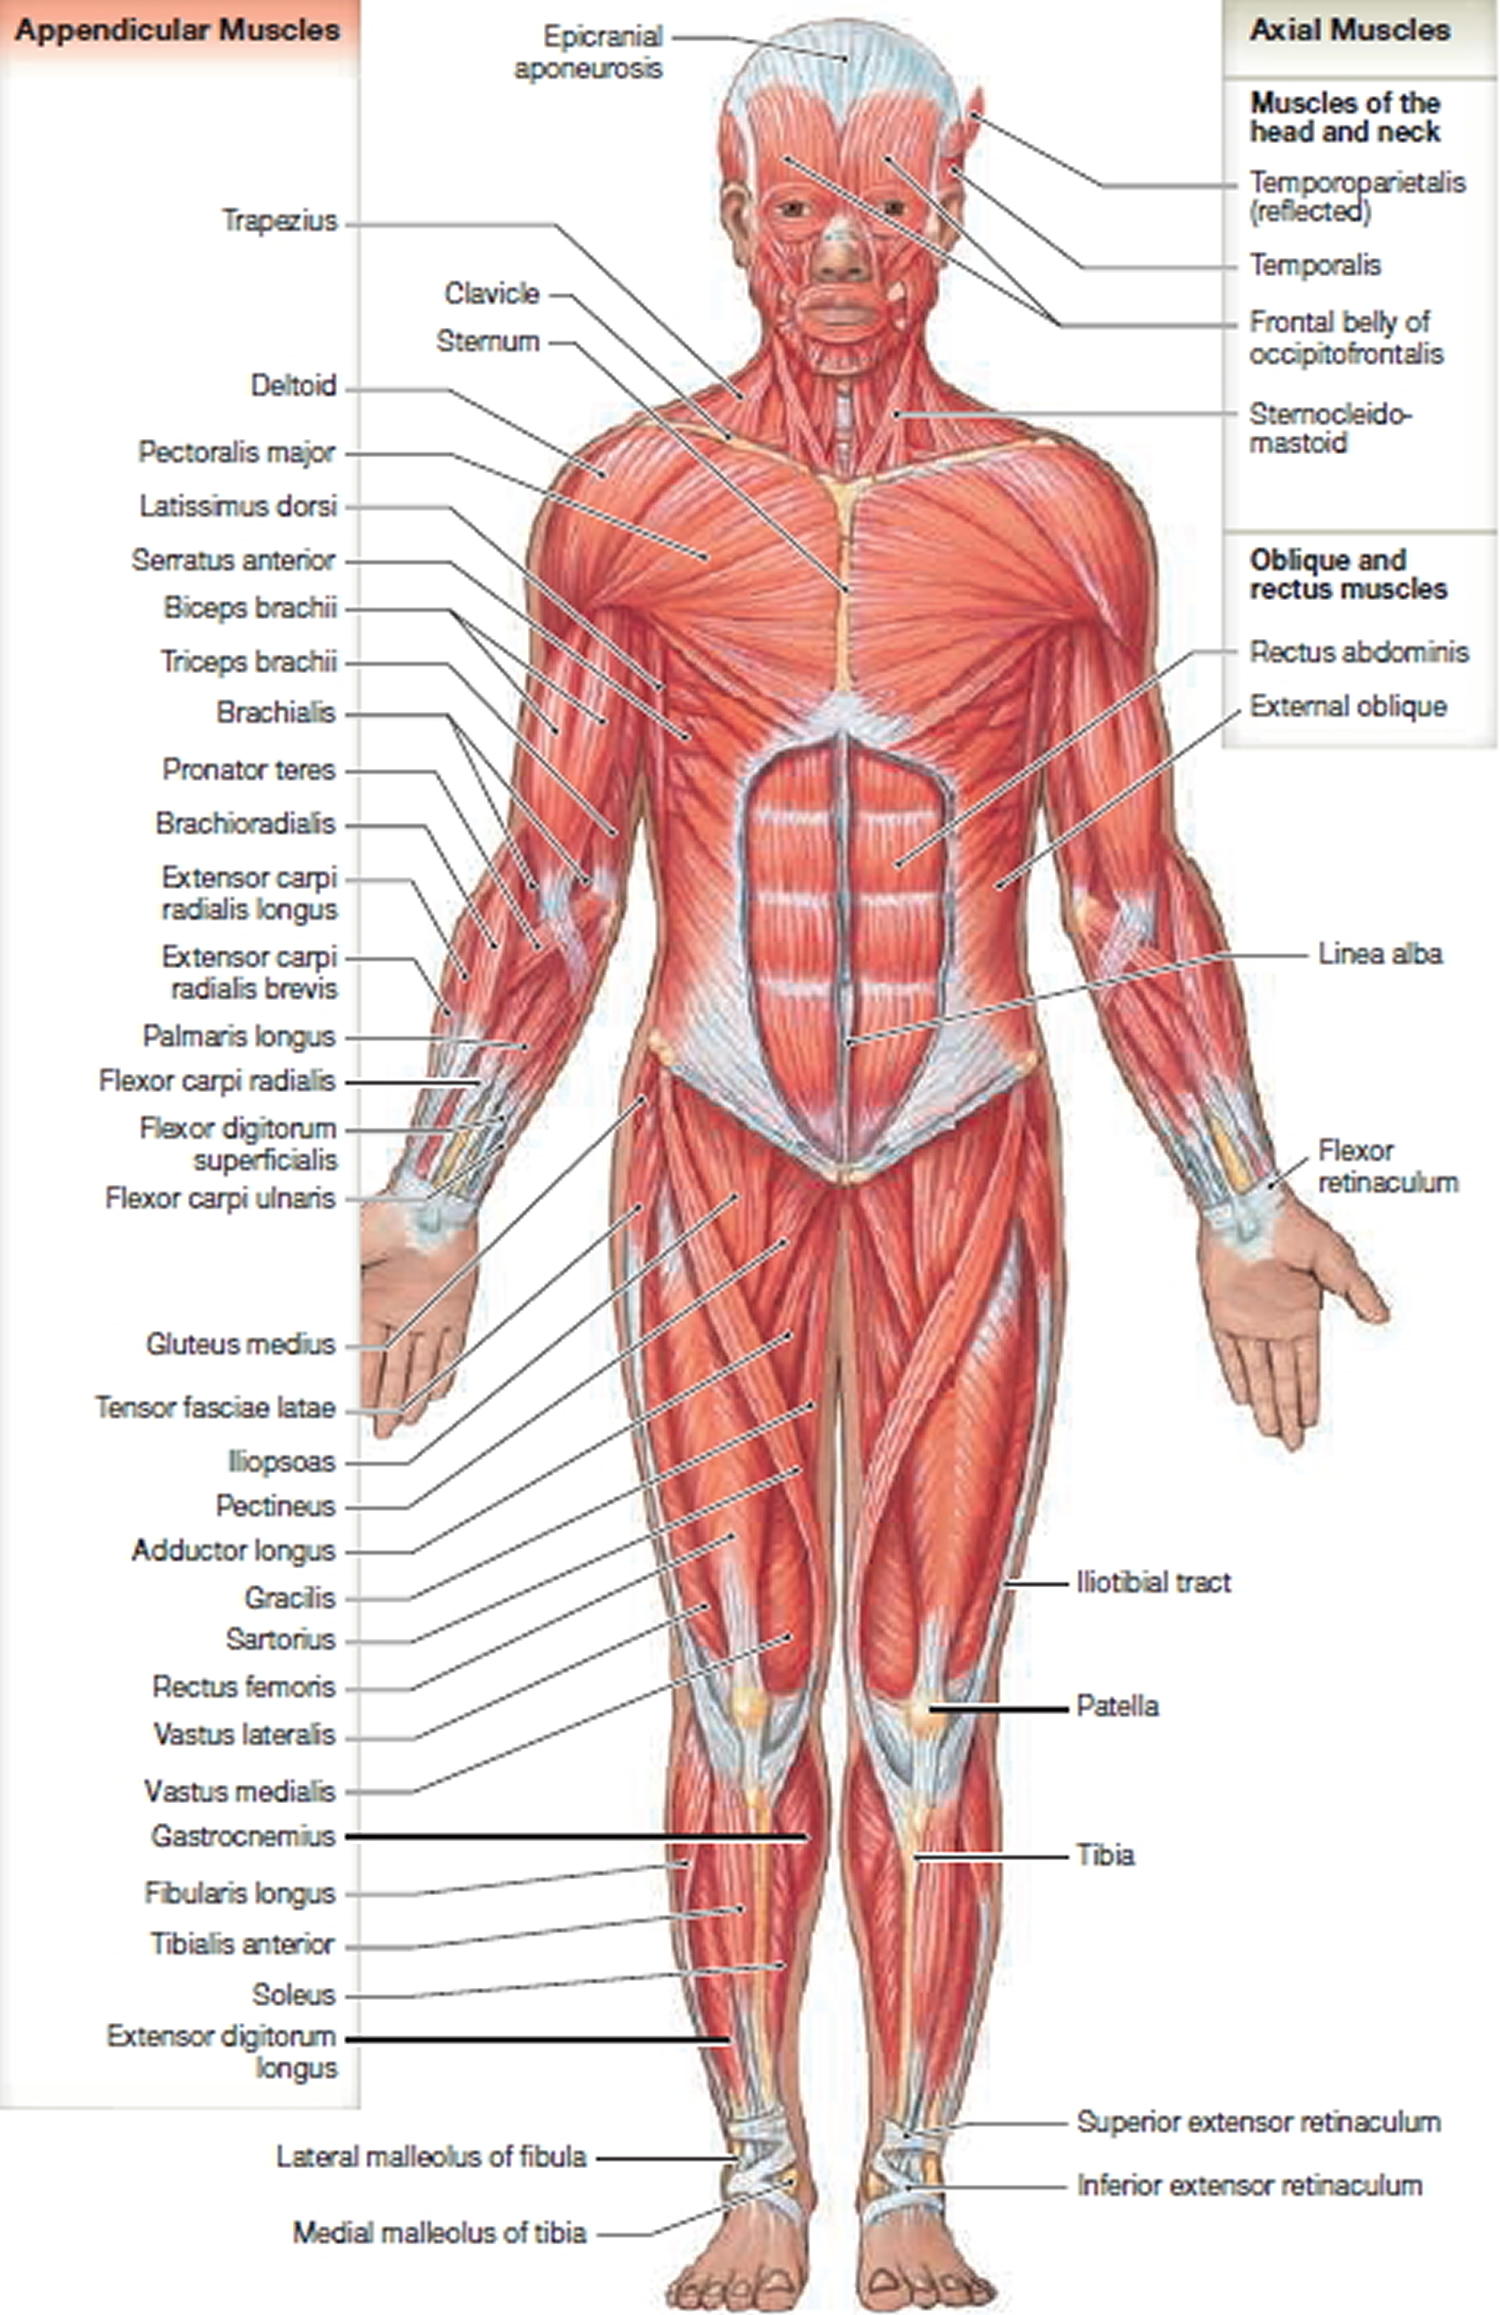 Muscle Anatomy - Skeletal Muscles - Groin Muscles - Calf Muscles